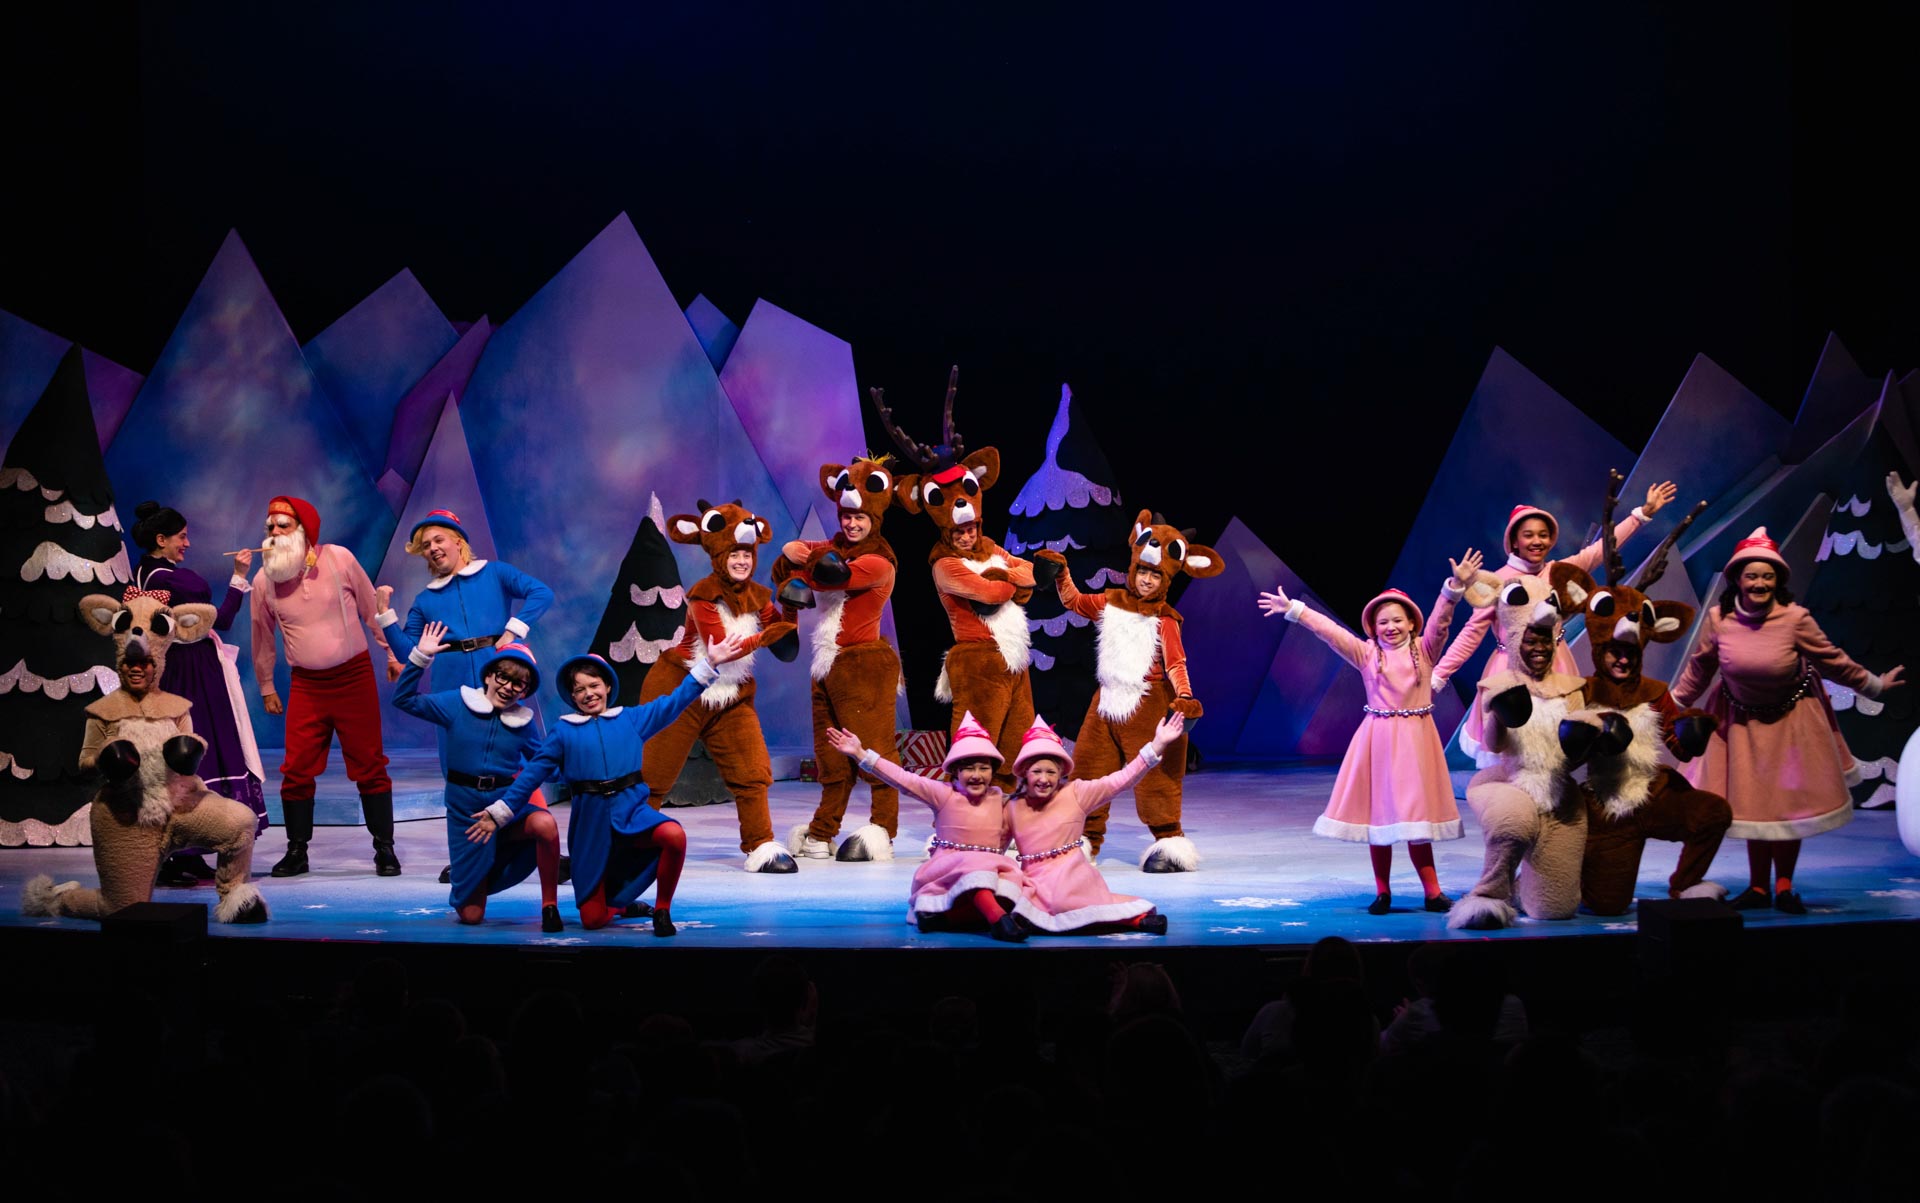 A photo of actors in costumes on stage with colorful lights performing in Rudolph the Red-Nosed Reindeer: The Musical at Stages Theatre Company